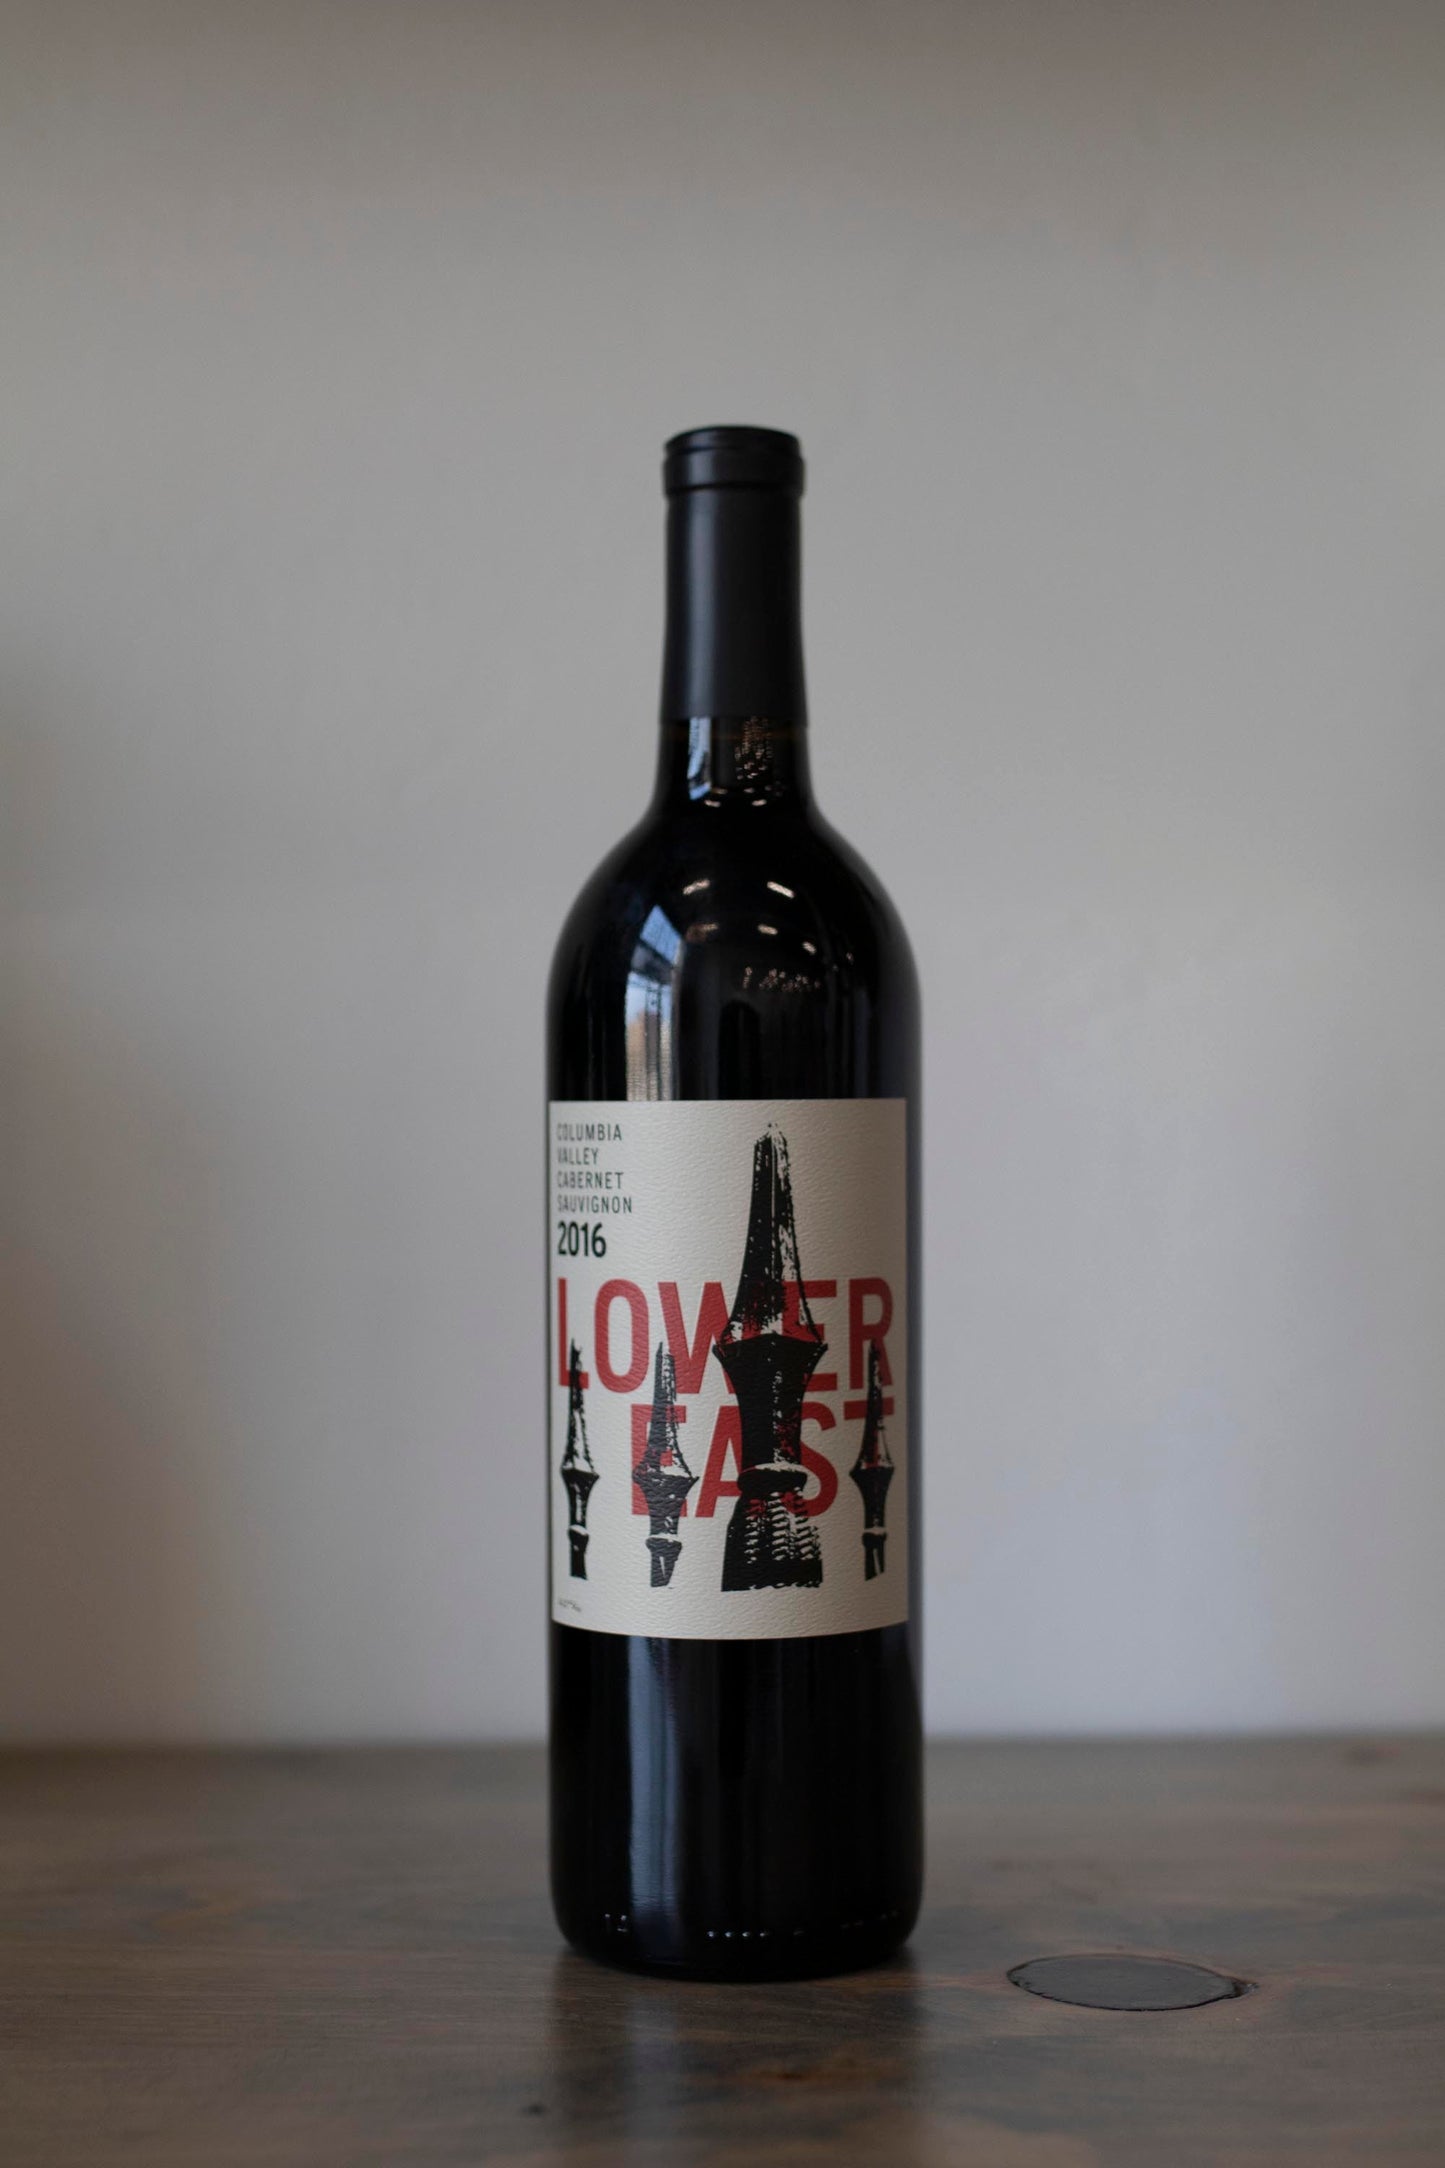 Bottle of Gramercy Lower East Cabernet found at Vine & Board in 3809 NW 166th St Suite 1, Edmond, OK 73012